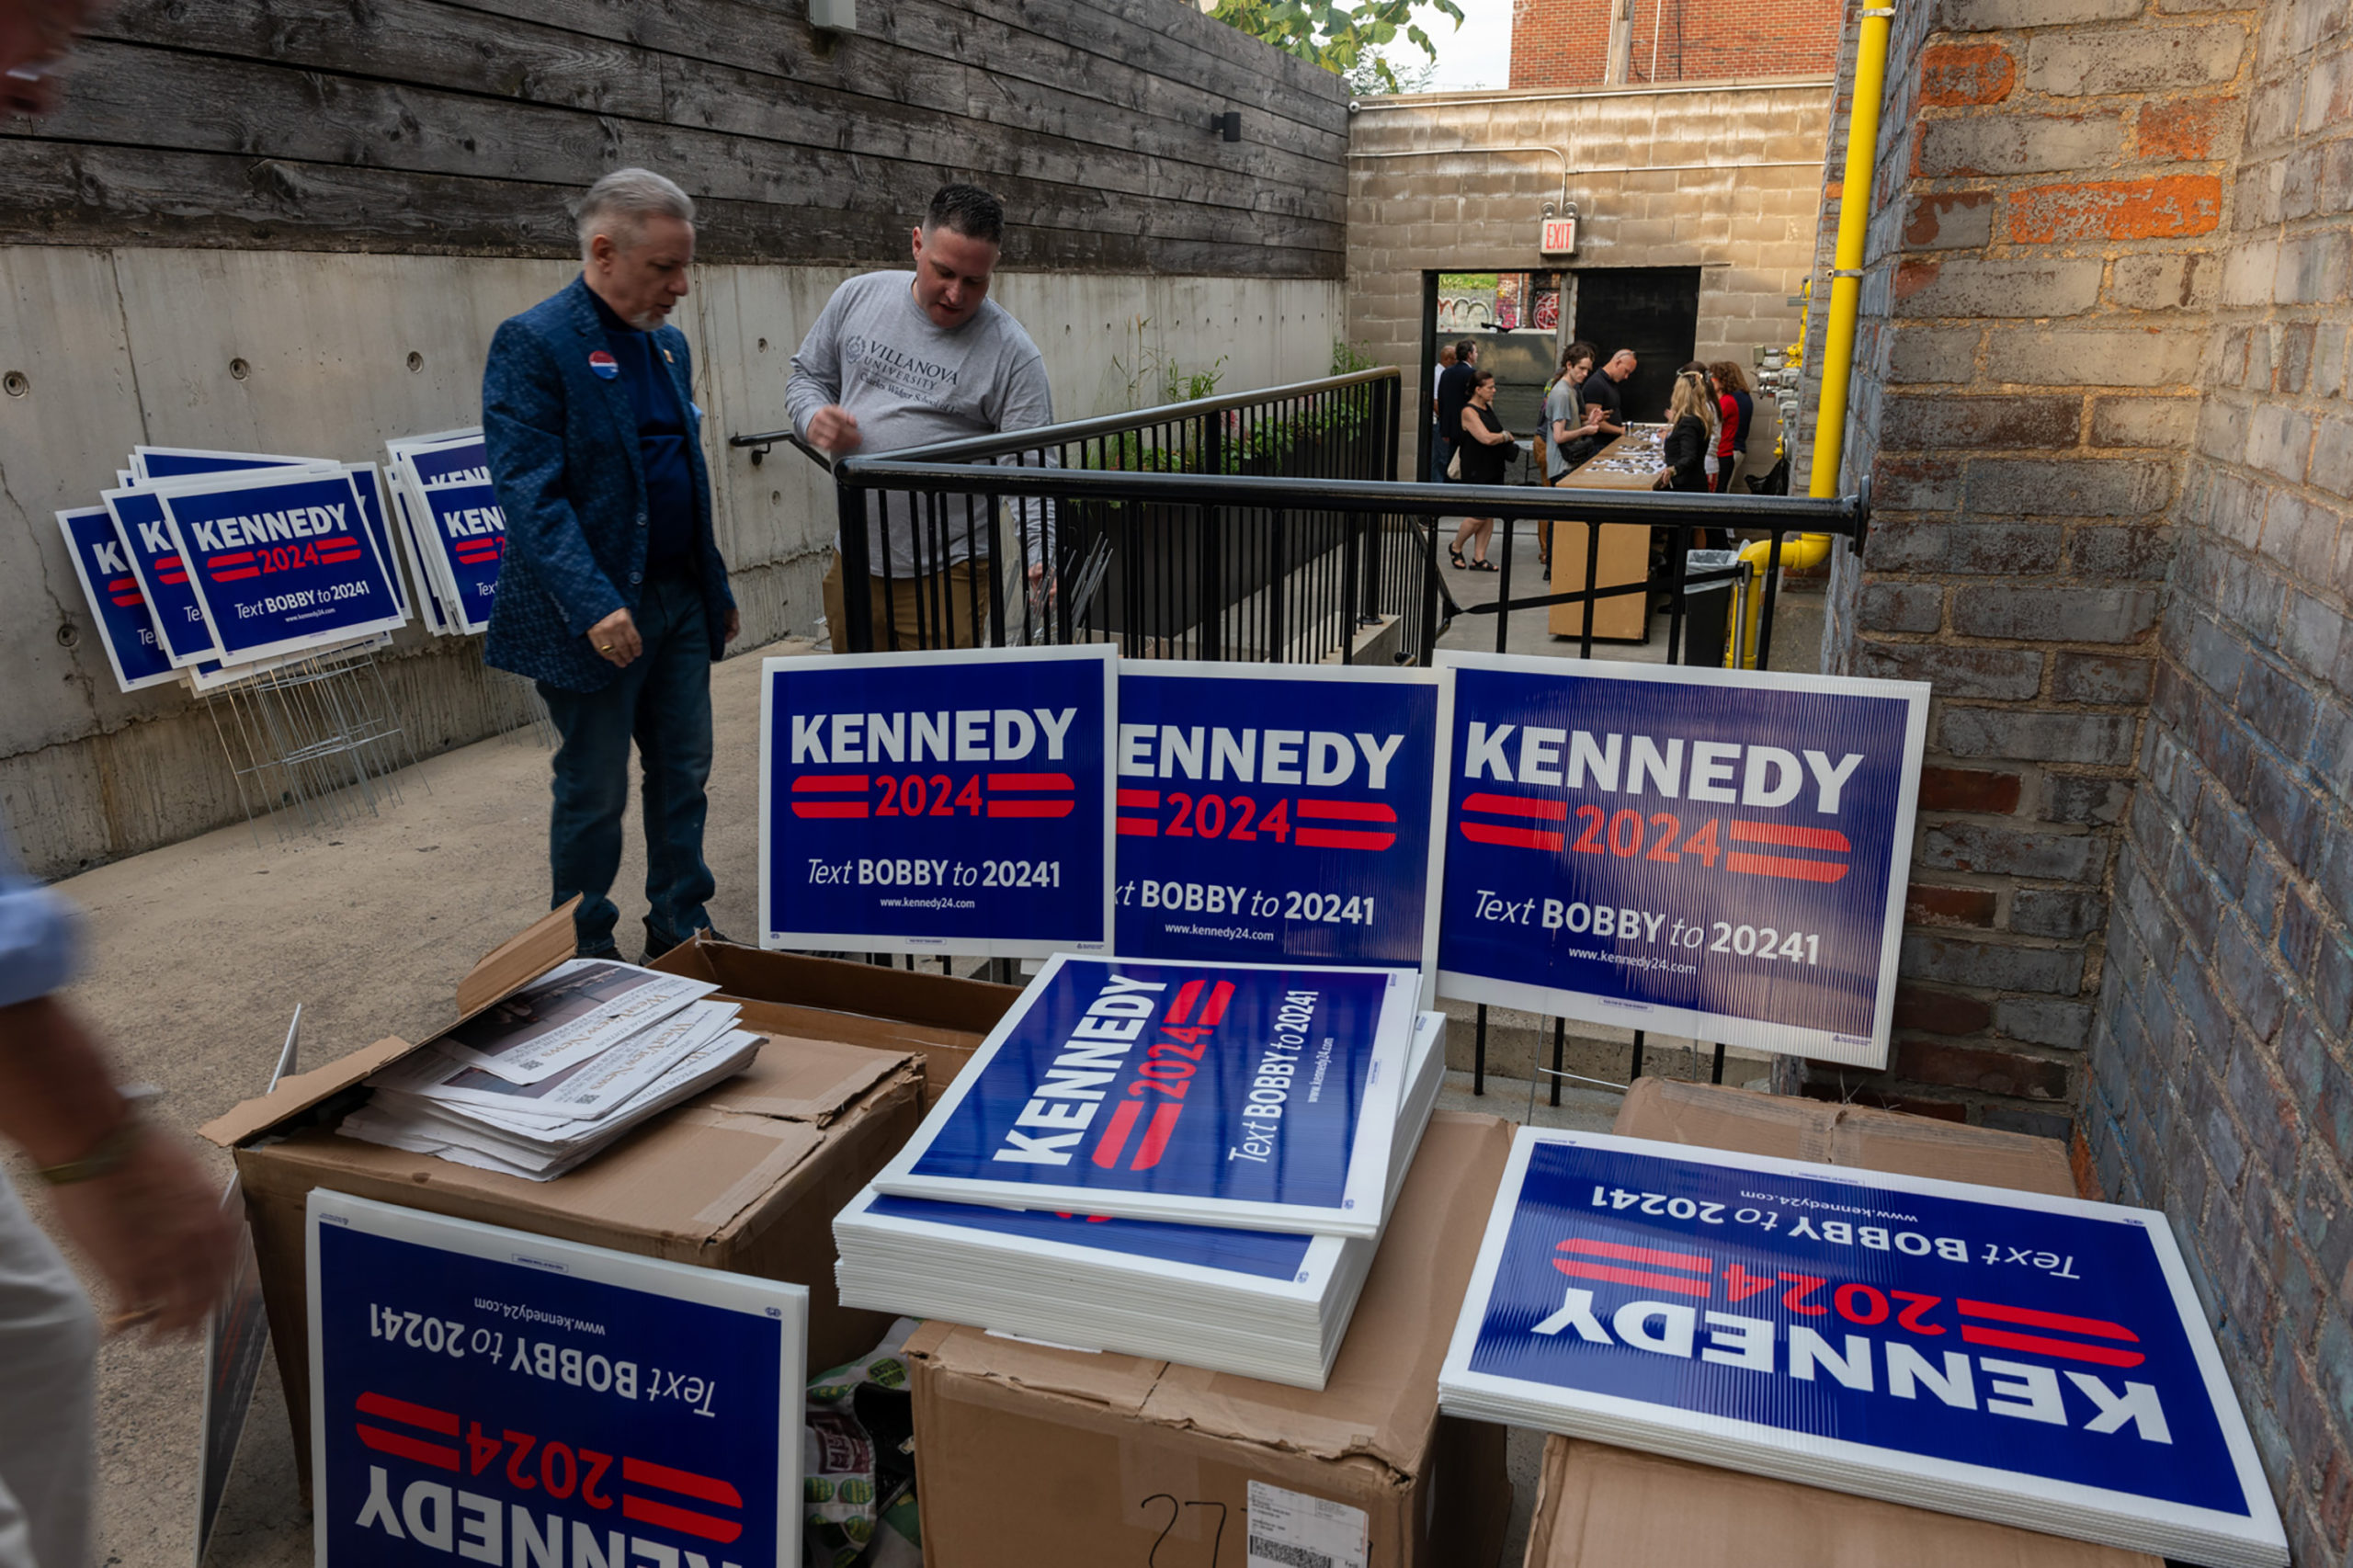 People wait for the arrival of Democratic presidential candidate Robert F. Kennedy, Jr. at a campaign event with voters in Brooklyn on August 30, 2023 in New York City. The 69-year-old Democrat is challenging President Biden in a longshot bid in the 2024 presidential race. Kennedy has been denounced by members of his family and many in the Democratic party for his fringe positions on vaccines and COVID. (Photo by Spencer Platt/Getty Images)